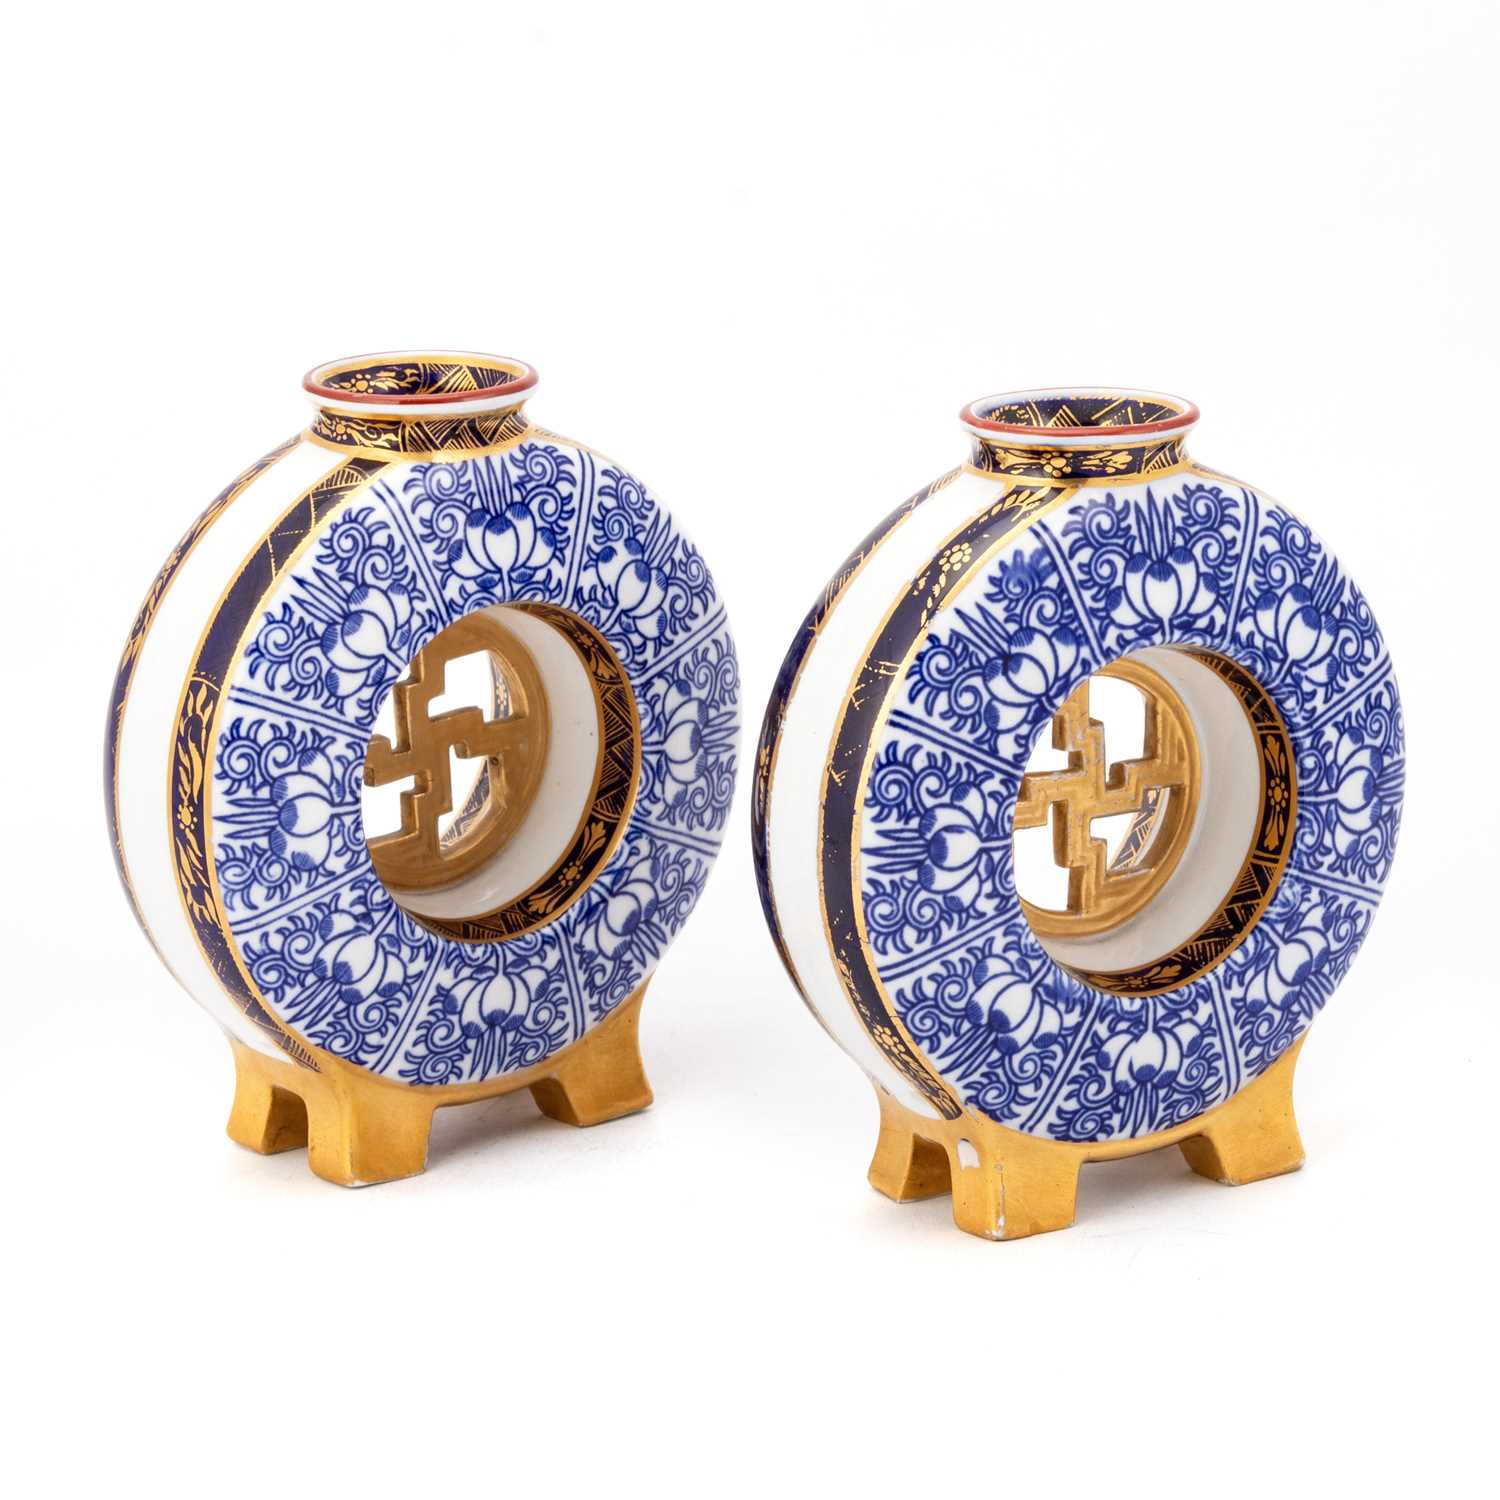 Lot 92 - A PAIR OF ROYAL WORCESTER JAPONISME MOONFLASKS WITH FRETWORK CENTRES, CIRCA 1880